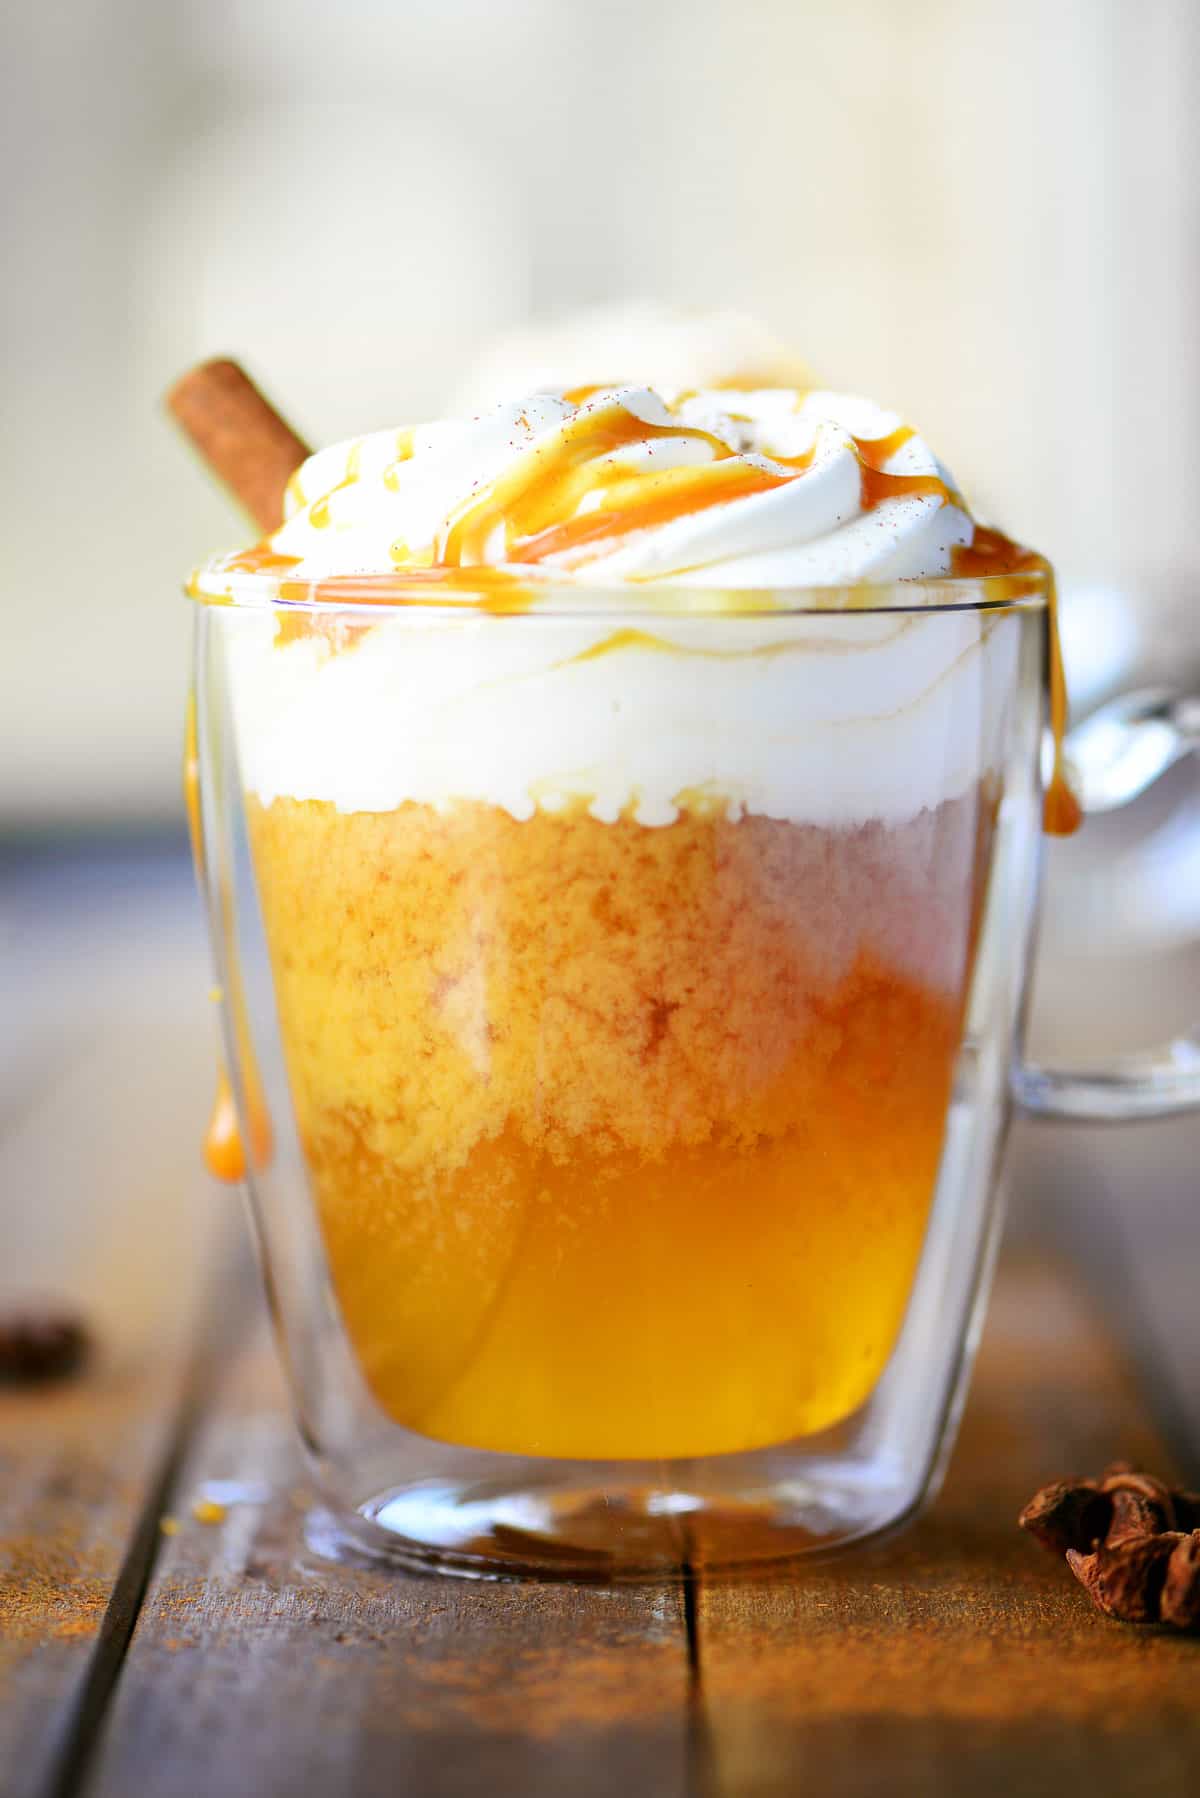  apple cider in a clear glass mug topped with caramel and whipped cream